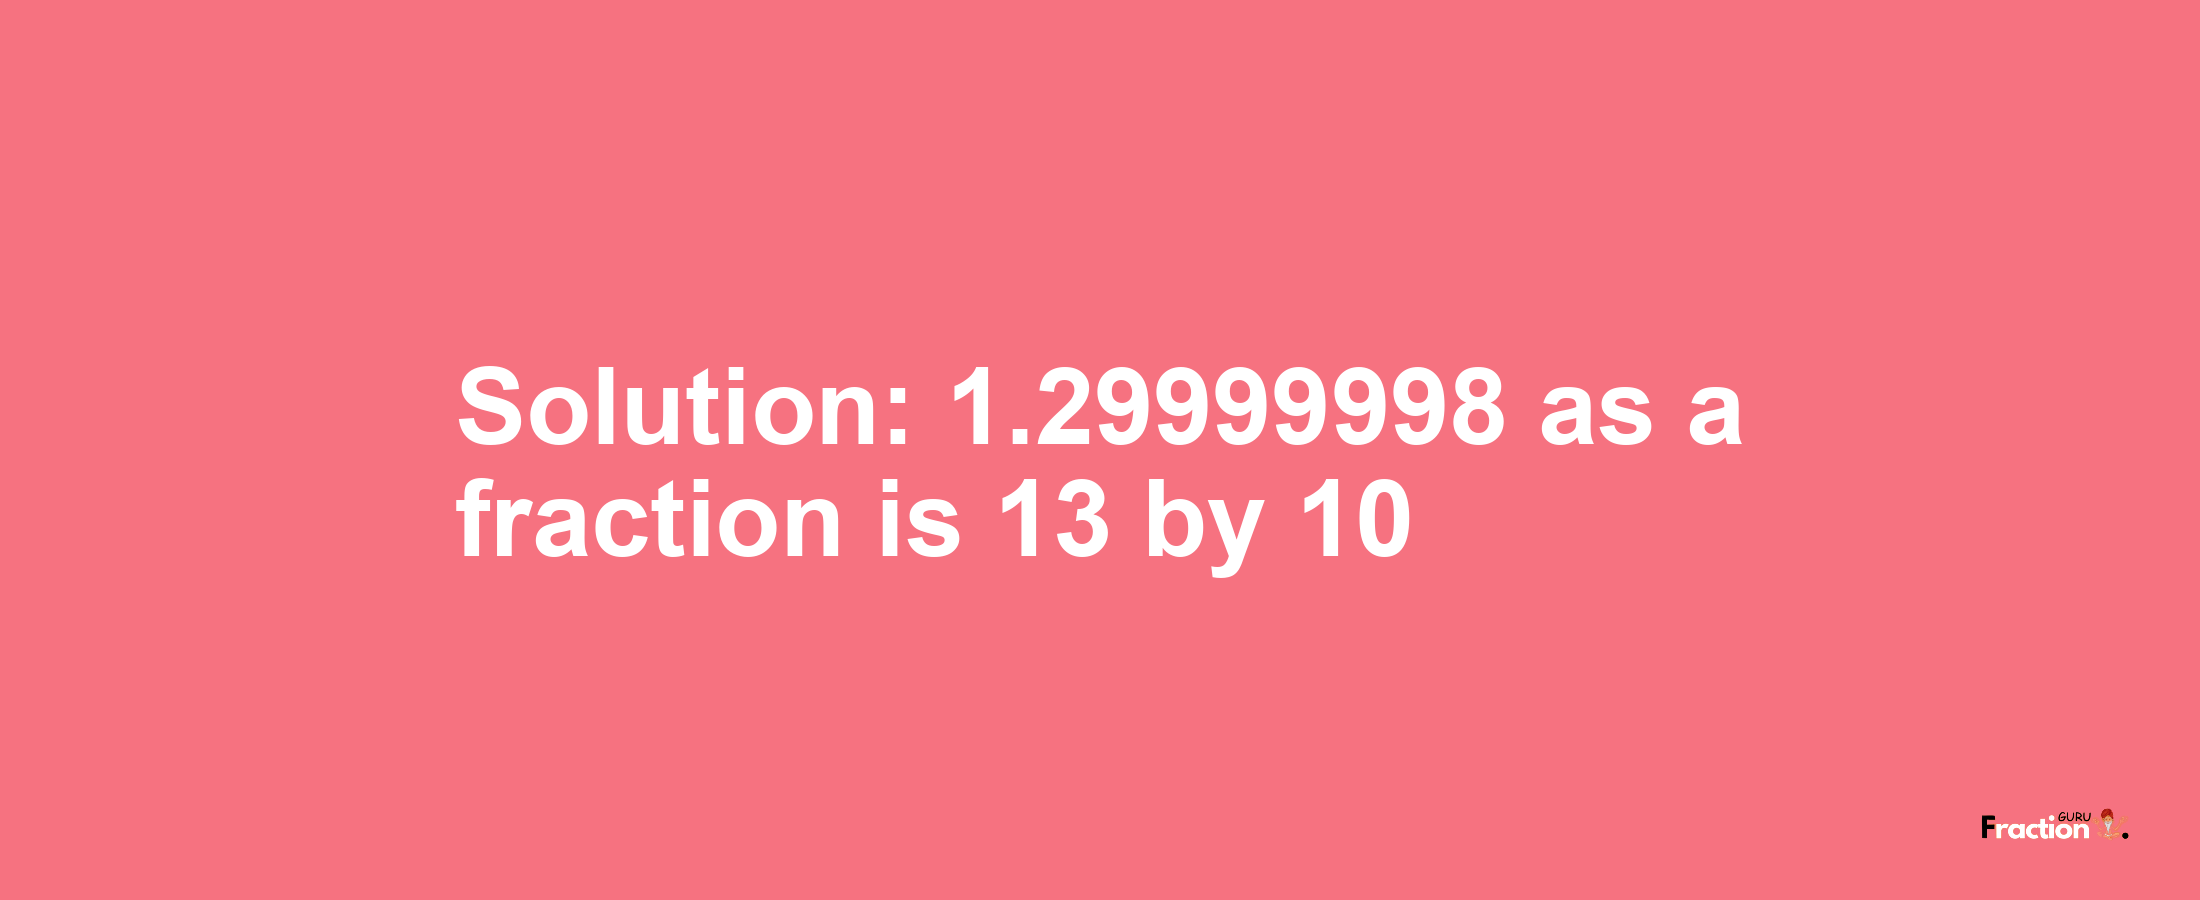 Solution:1.29999998 as a fraction is 13/10